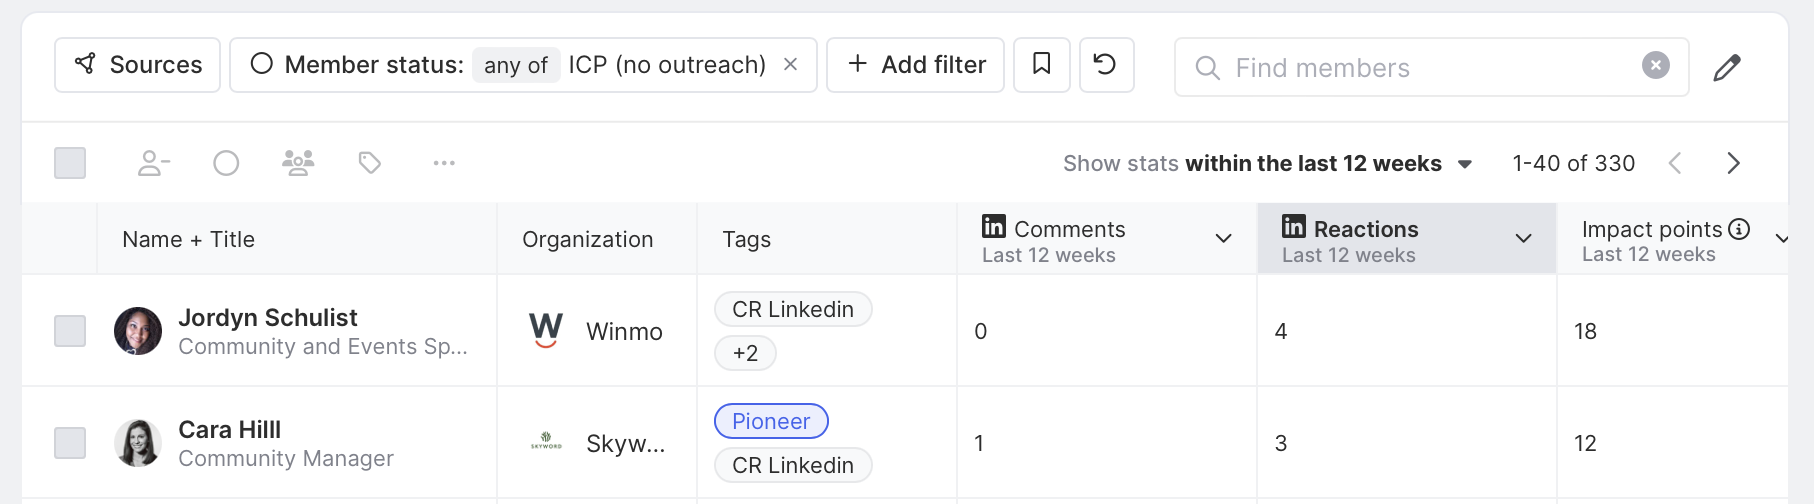 Custom view with LinkedIn activity in columns